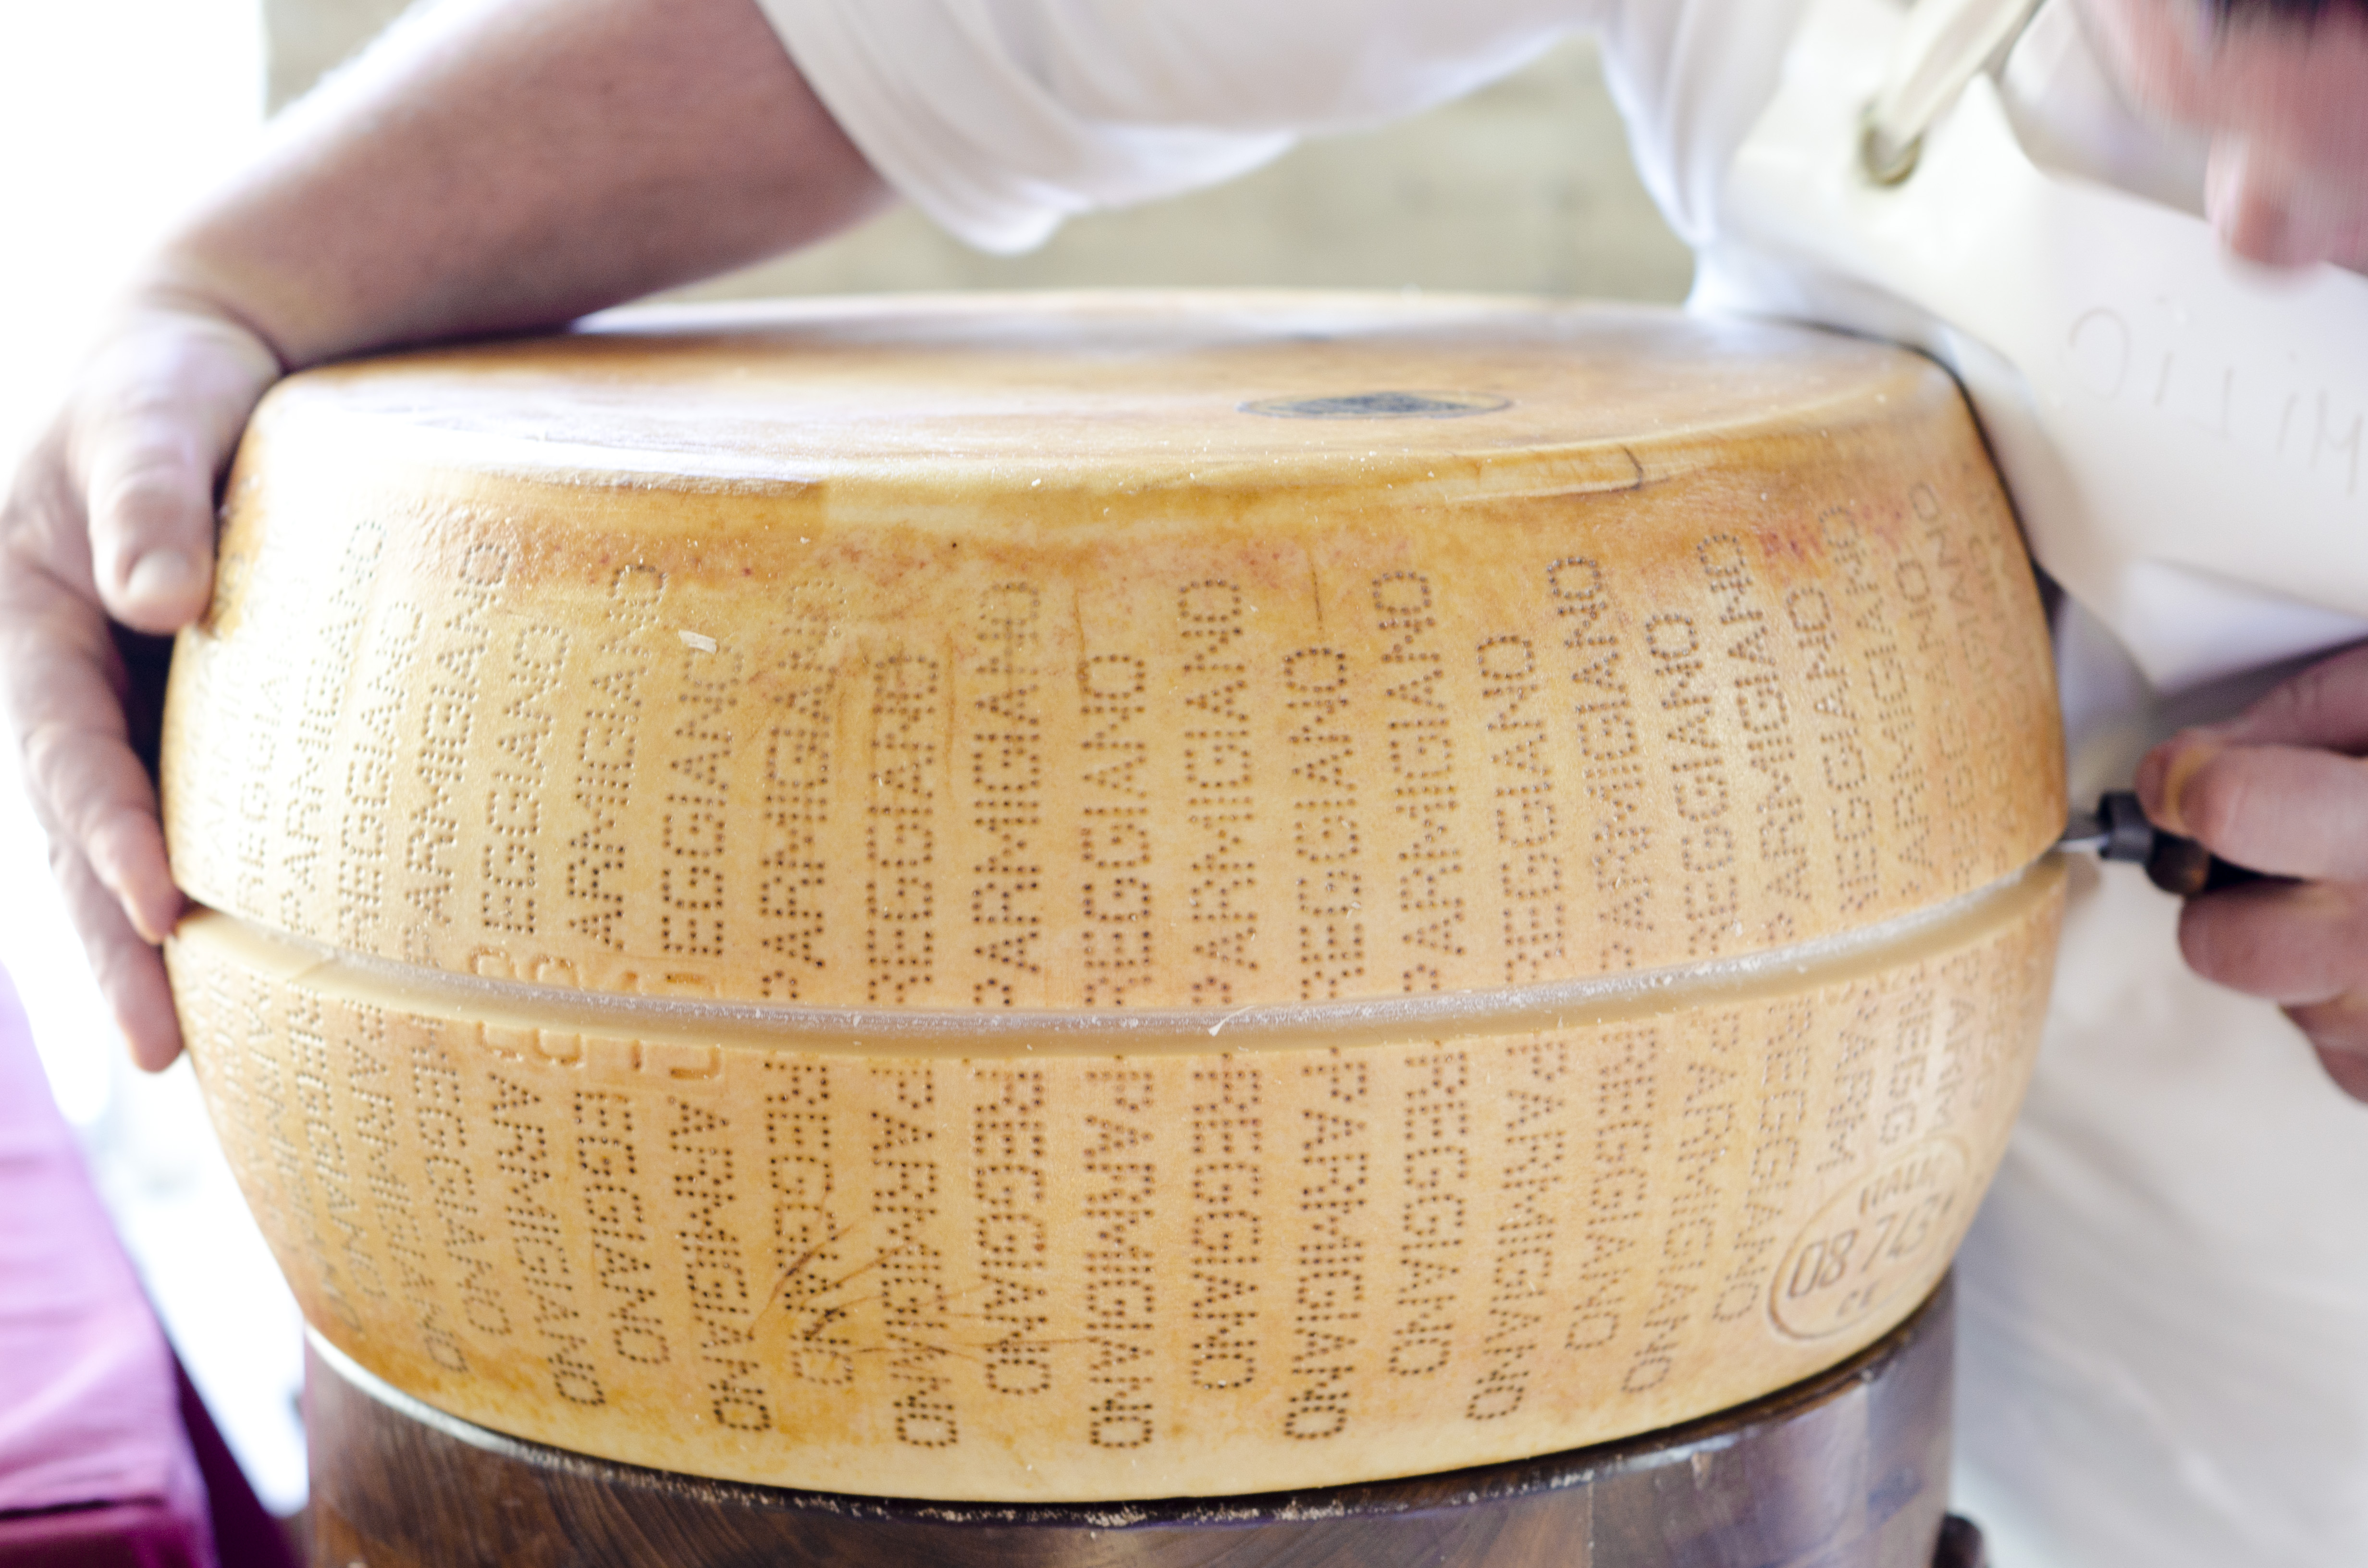 The marked wheels of Parmigiano-Reggiano (Parmesan) cheese